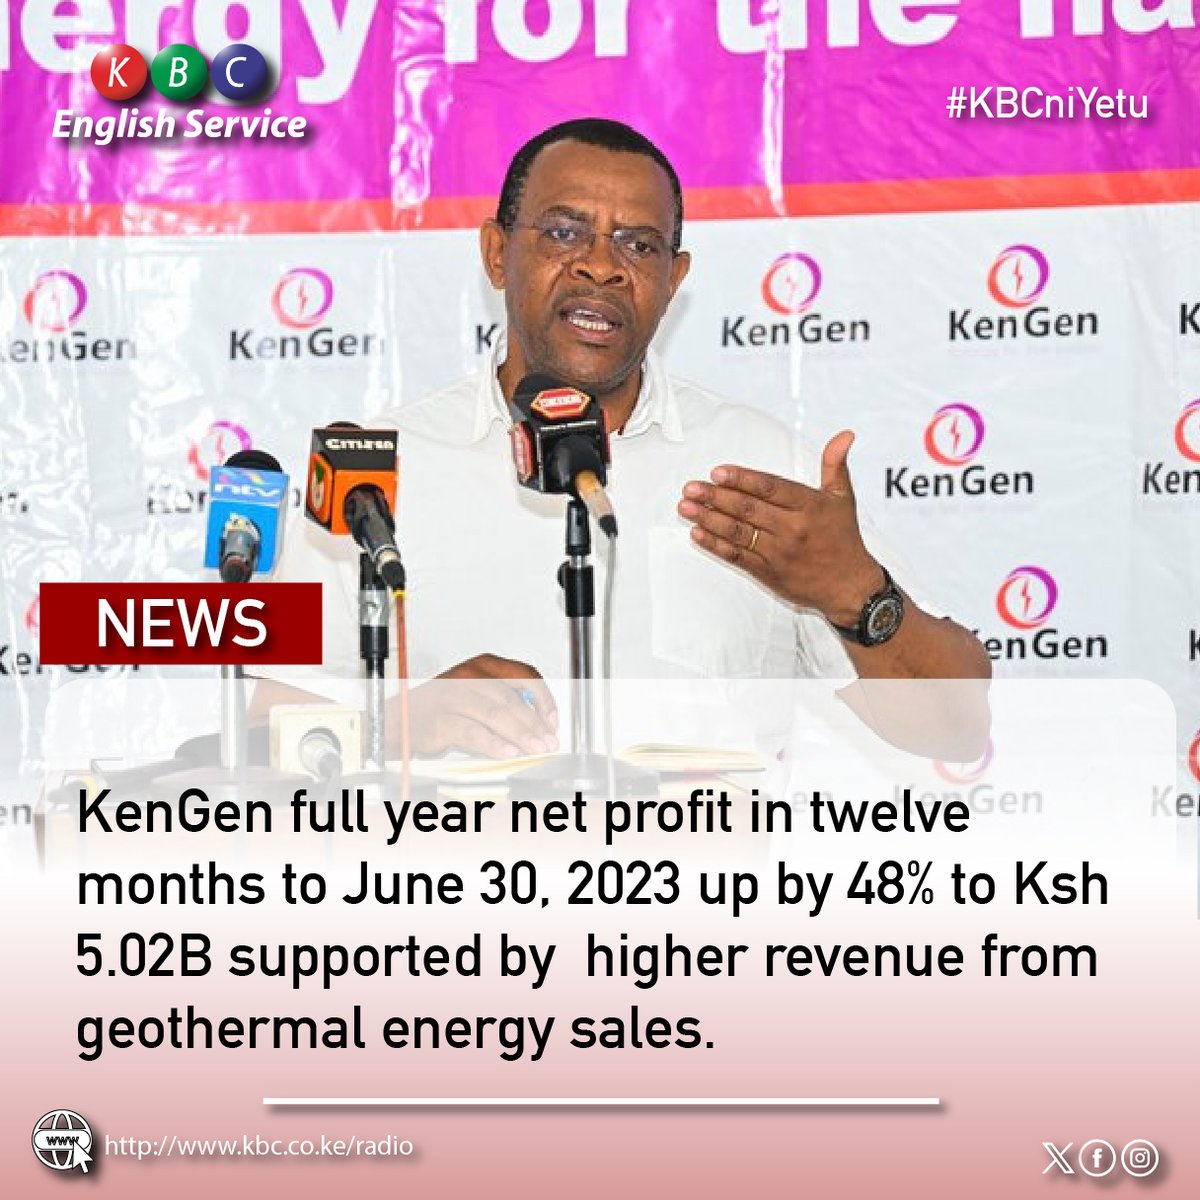 KenGen full year net profit in twelve months to June 30, 2023 up by 48% to Ksh 5.02B supported by higher revenue from geothermal energy sales. ^PMN #KBCEnglishService